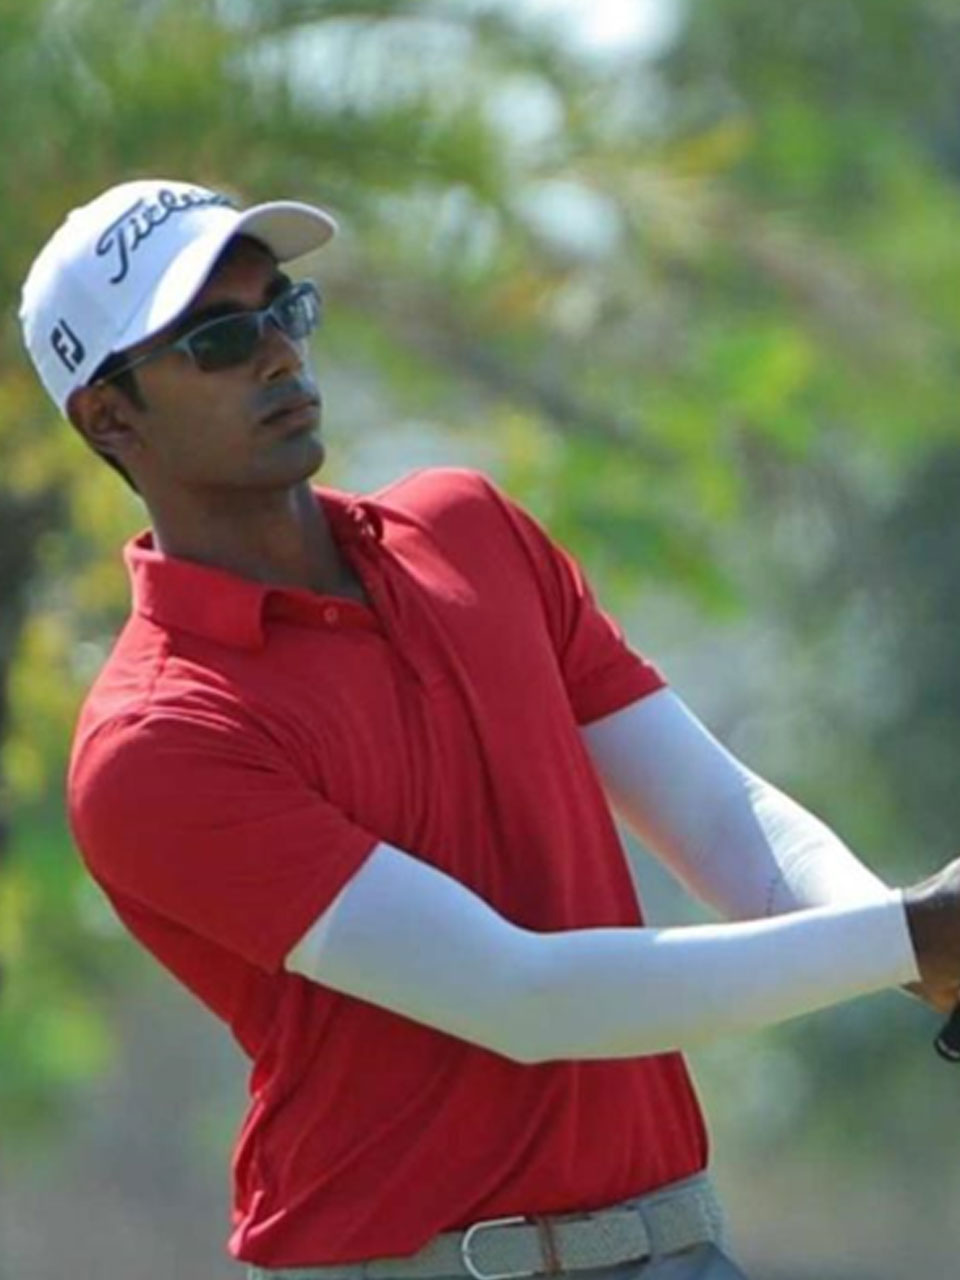 Shaurya Binu wins his debut professional event with a standout performance. His final round score of 64 showcased his dominance over the field this week.